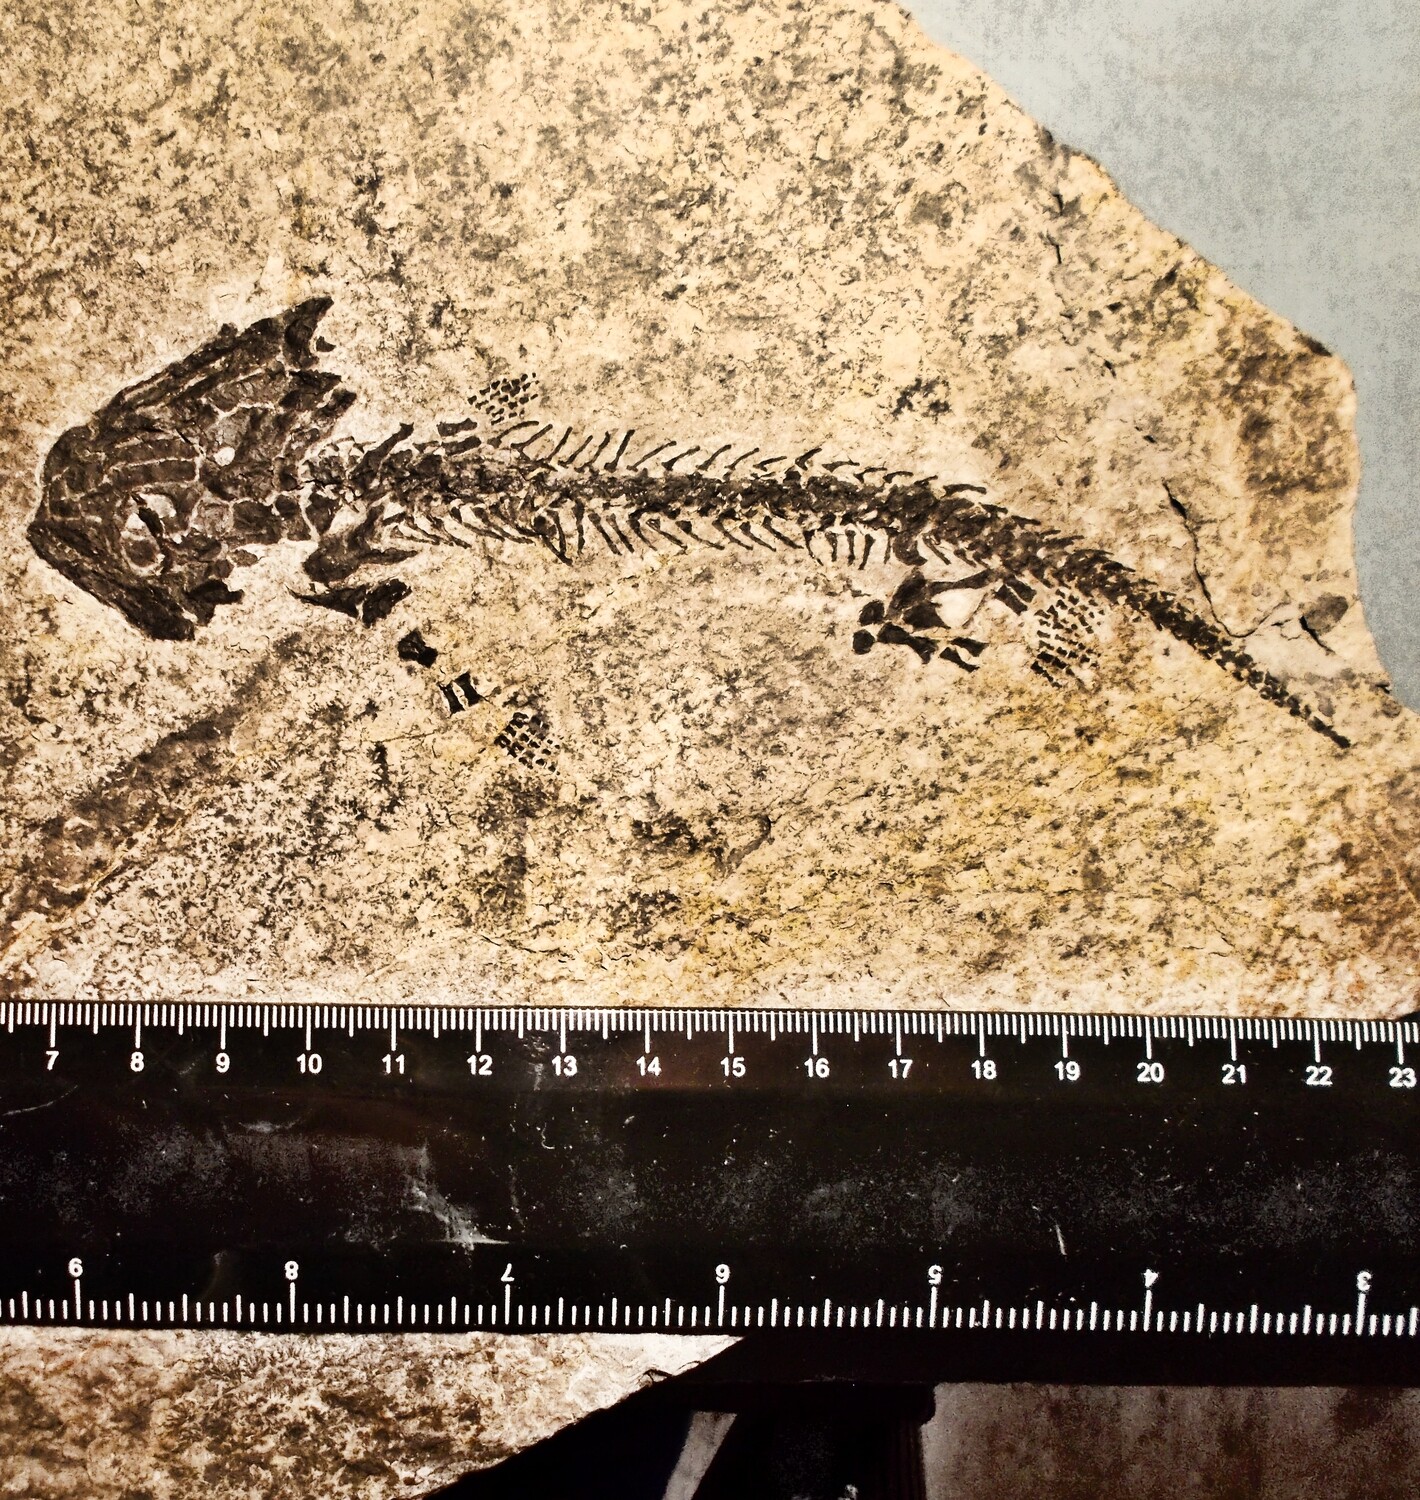 Excellent 16cm complete Discosaurischus pulcherrimus; Stegocephalid amphibian with lizard-like body and all phalanges intact: Lower Permian, Czech Republic